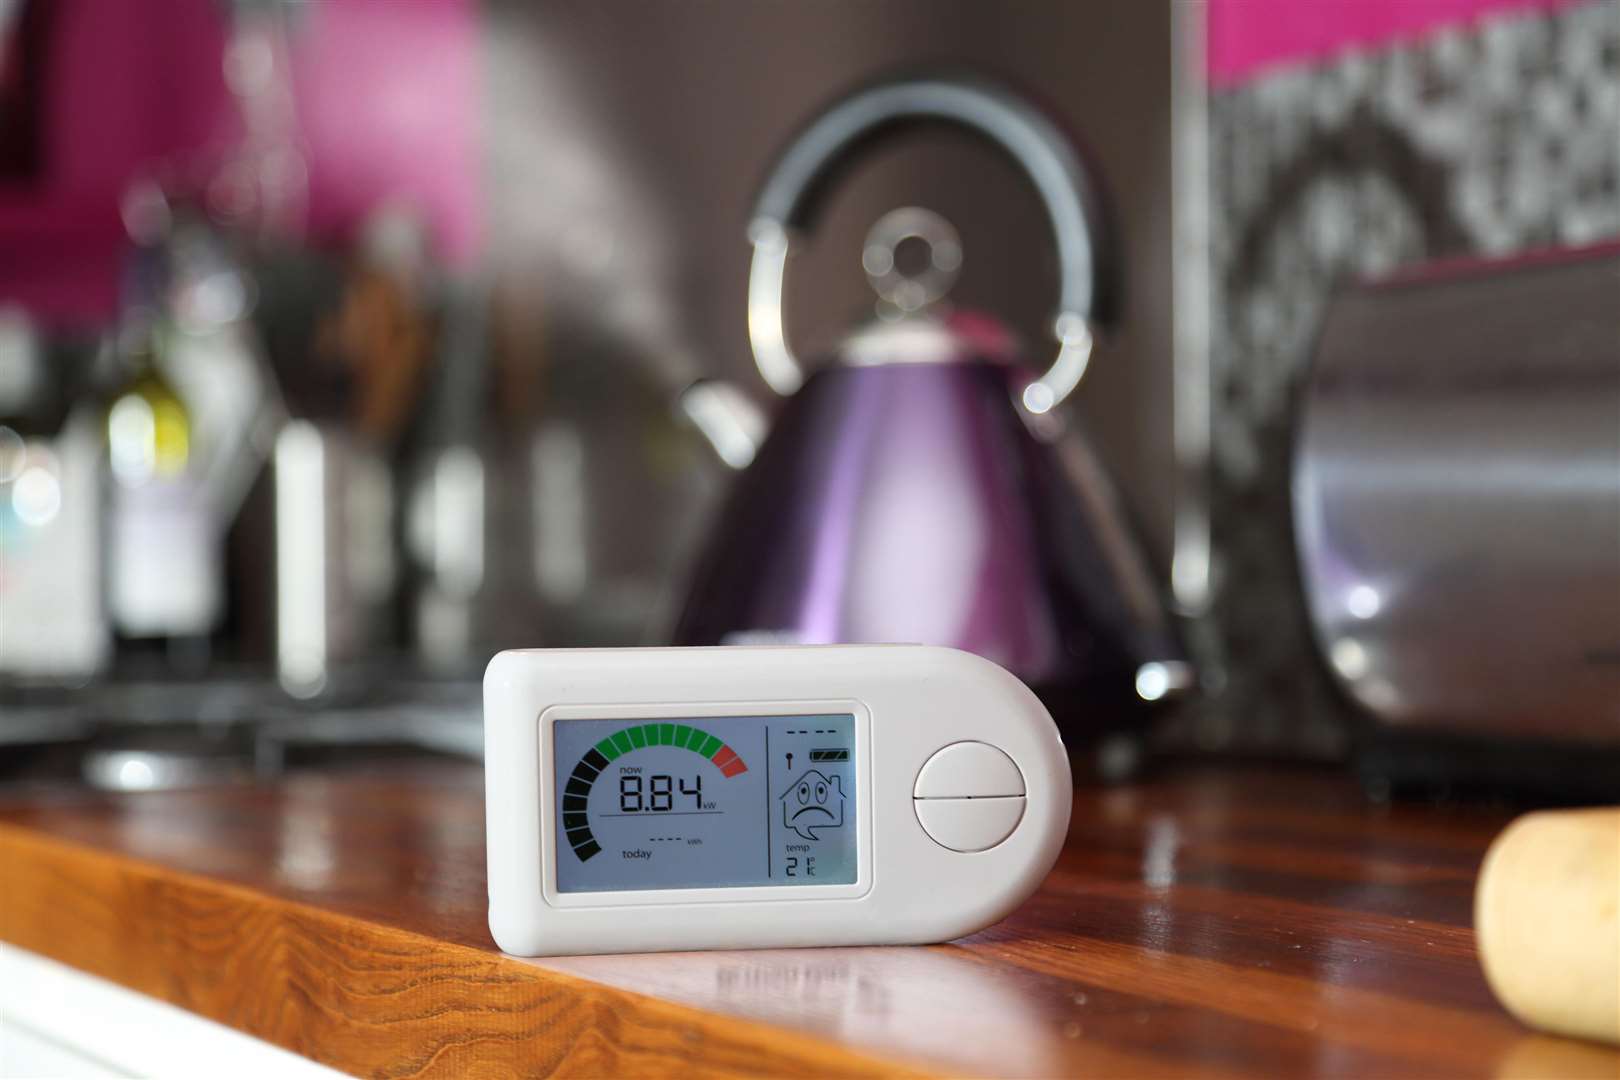 A smart meter can clearly show you in real time how much energy you're using